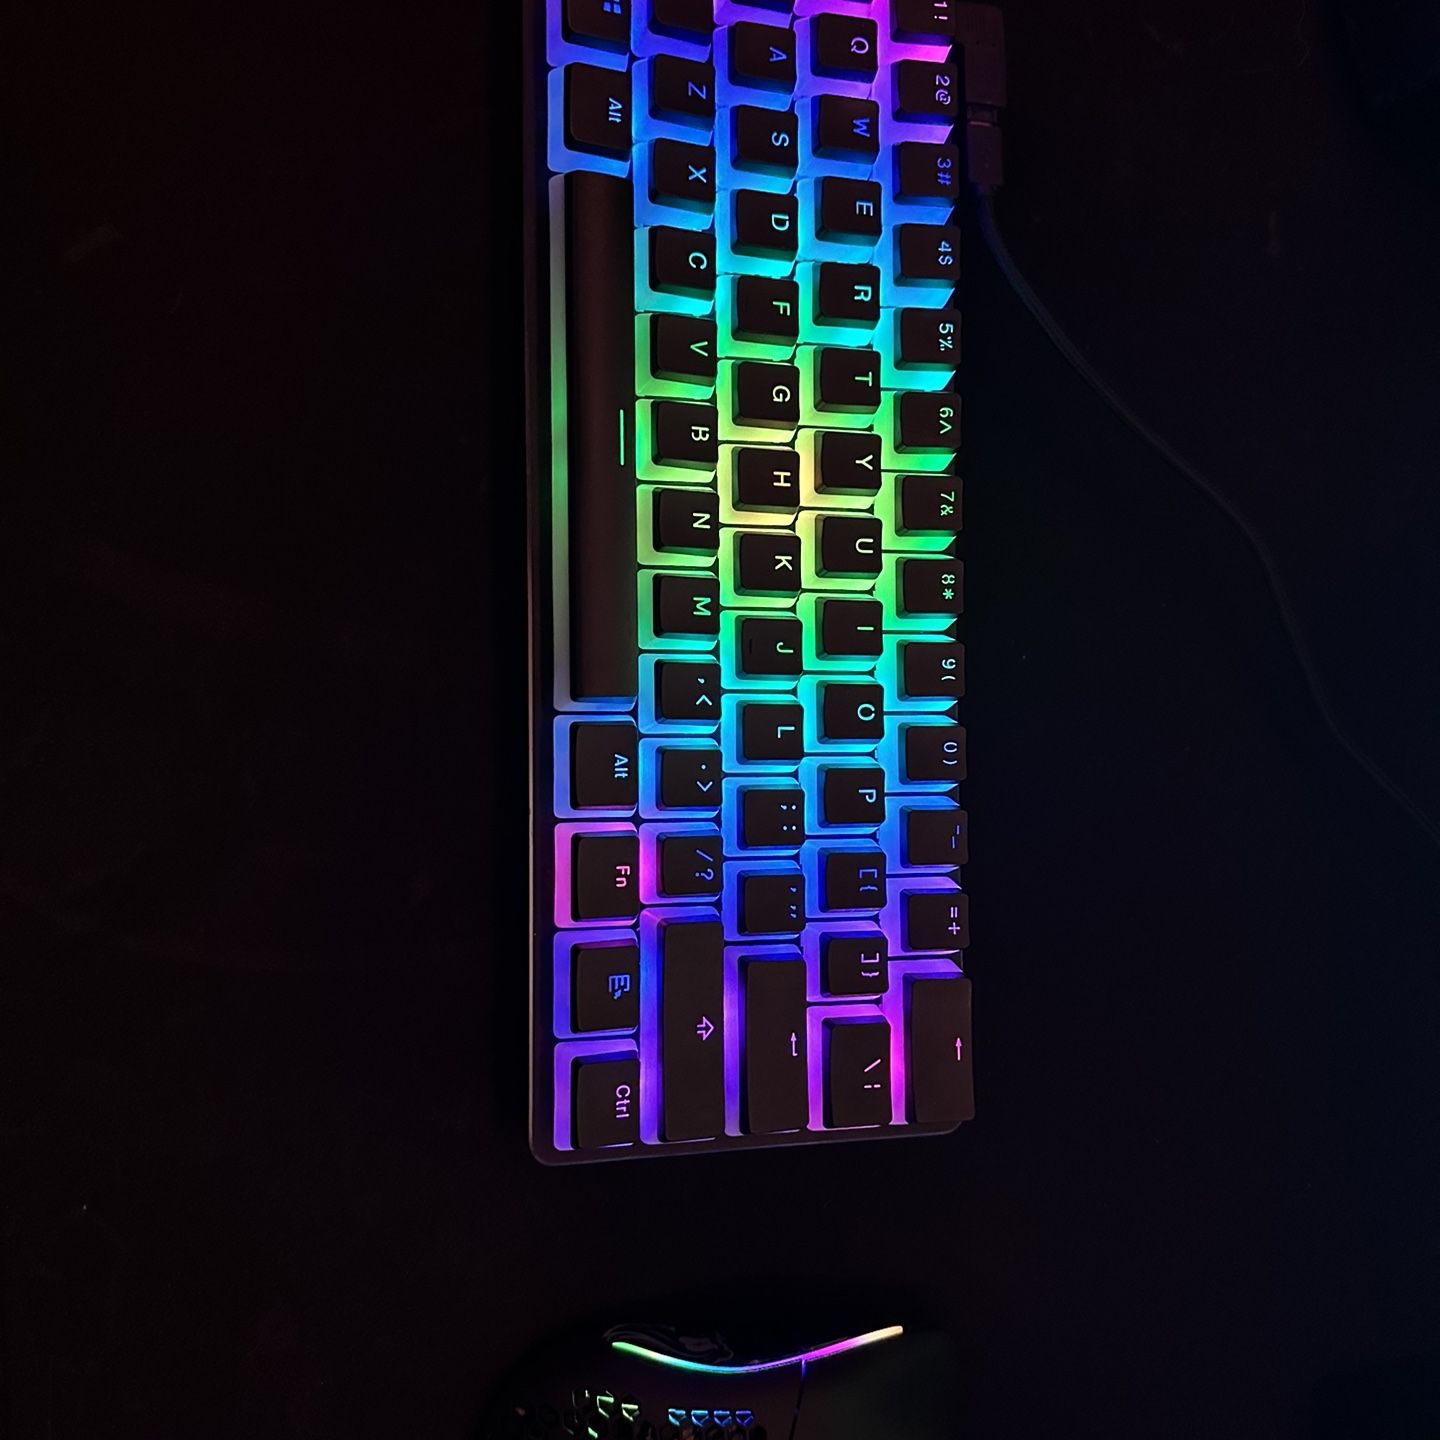 Glorious Model O- Minus Wireless Gaming Mouse and Glorious GMMK 60% Keyboard